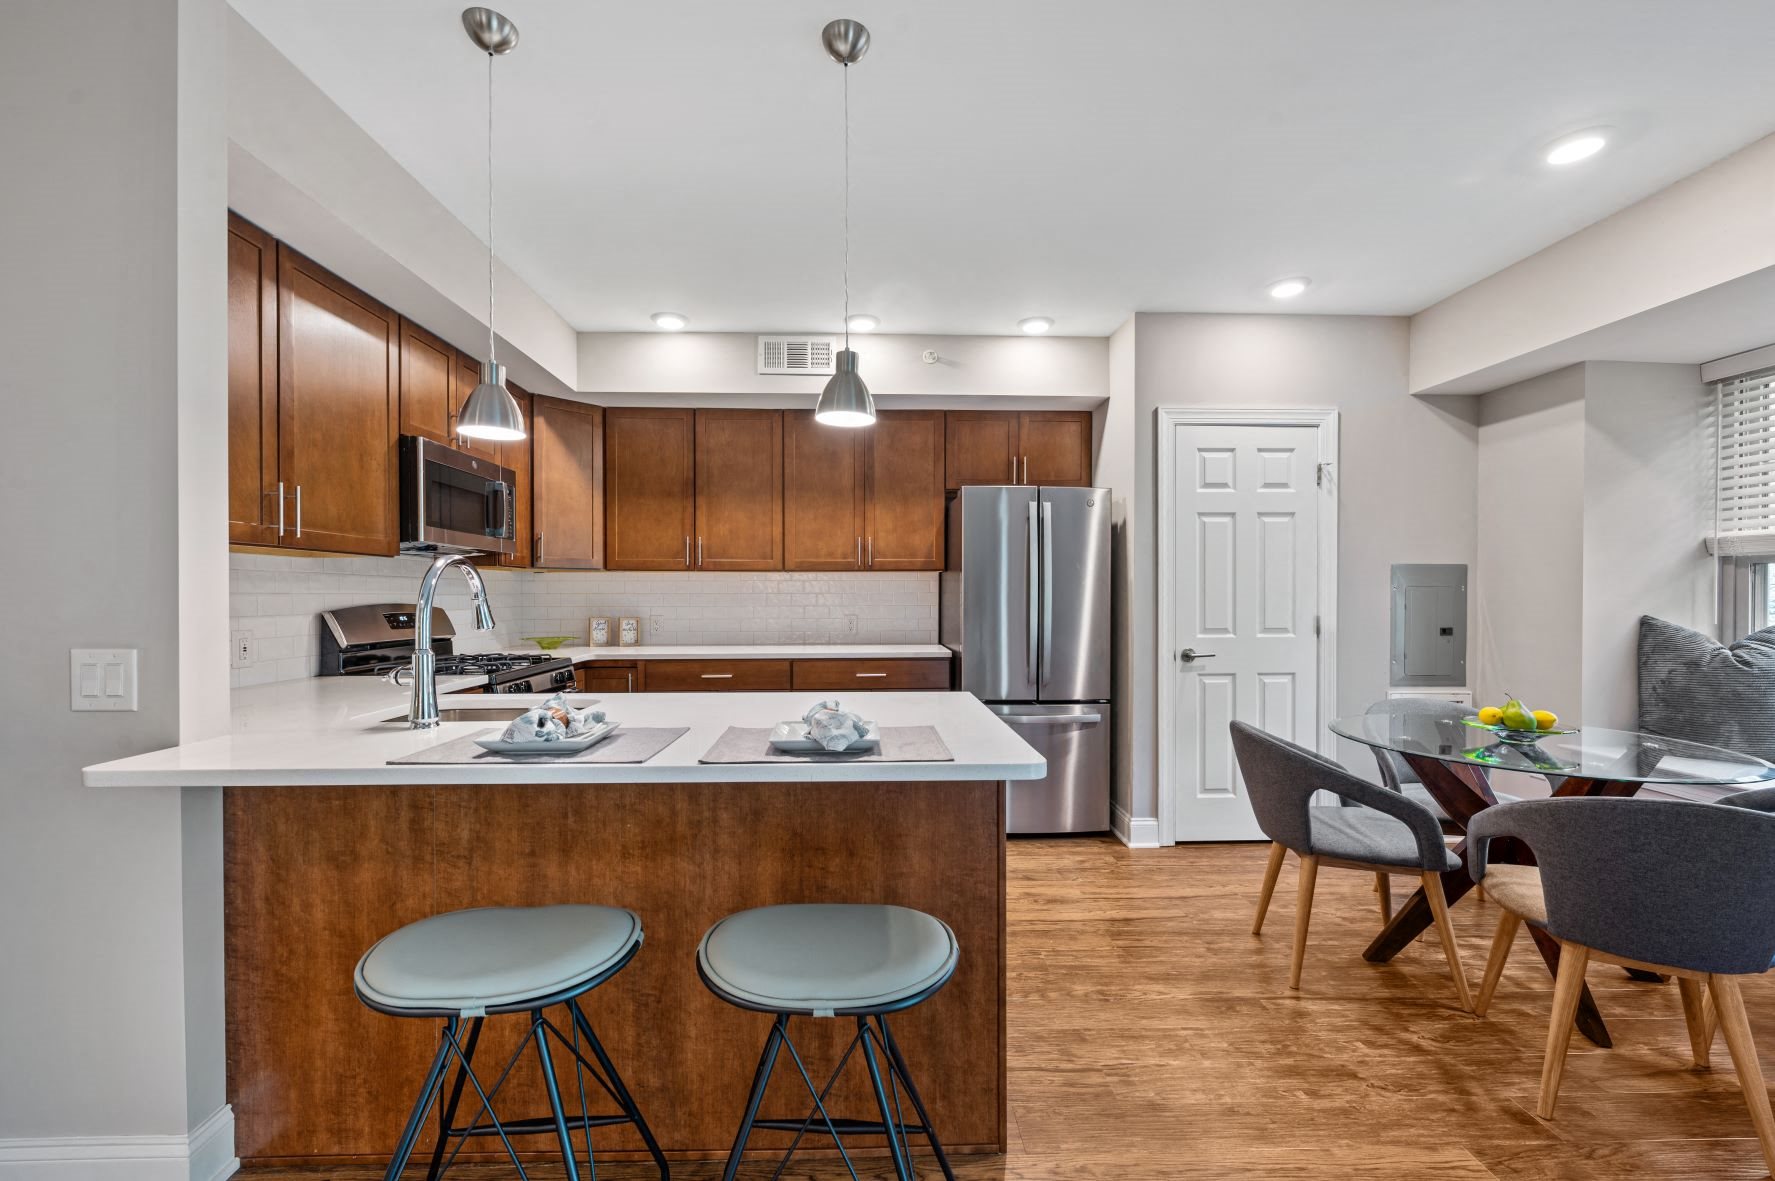 Kitchen at Severgn with hardwood flooring, dining area, and breakfast bar